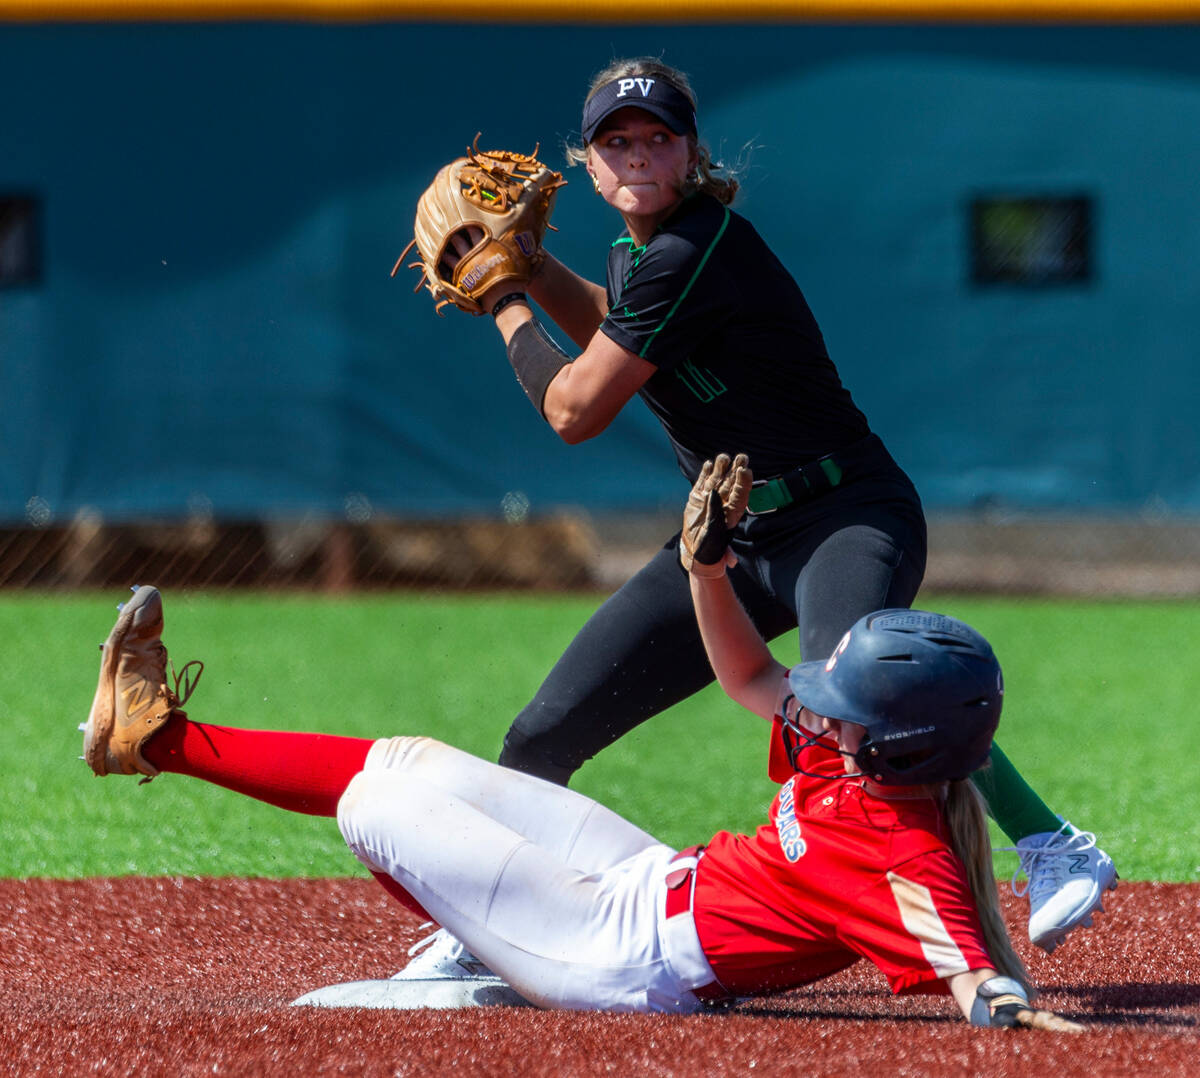 Palo Verde infielder Taylor Johns (11) looks to throw after tagging second base as Coronado ru ...